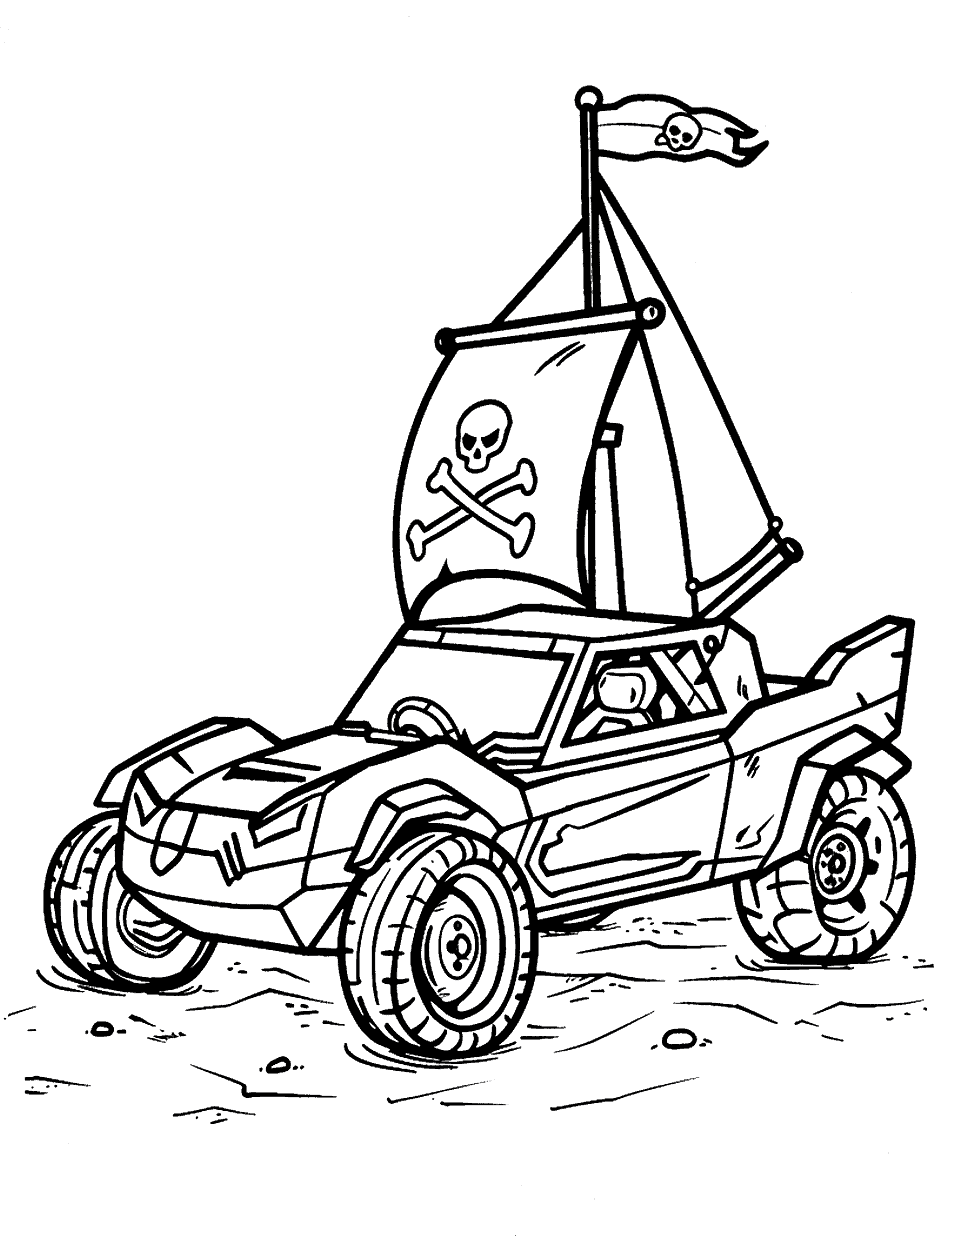 Pirate Treasure Hunt Coloring Page - A Hot Wheels car modified to look like a pirate ship.